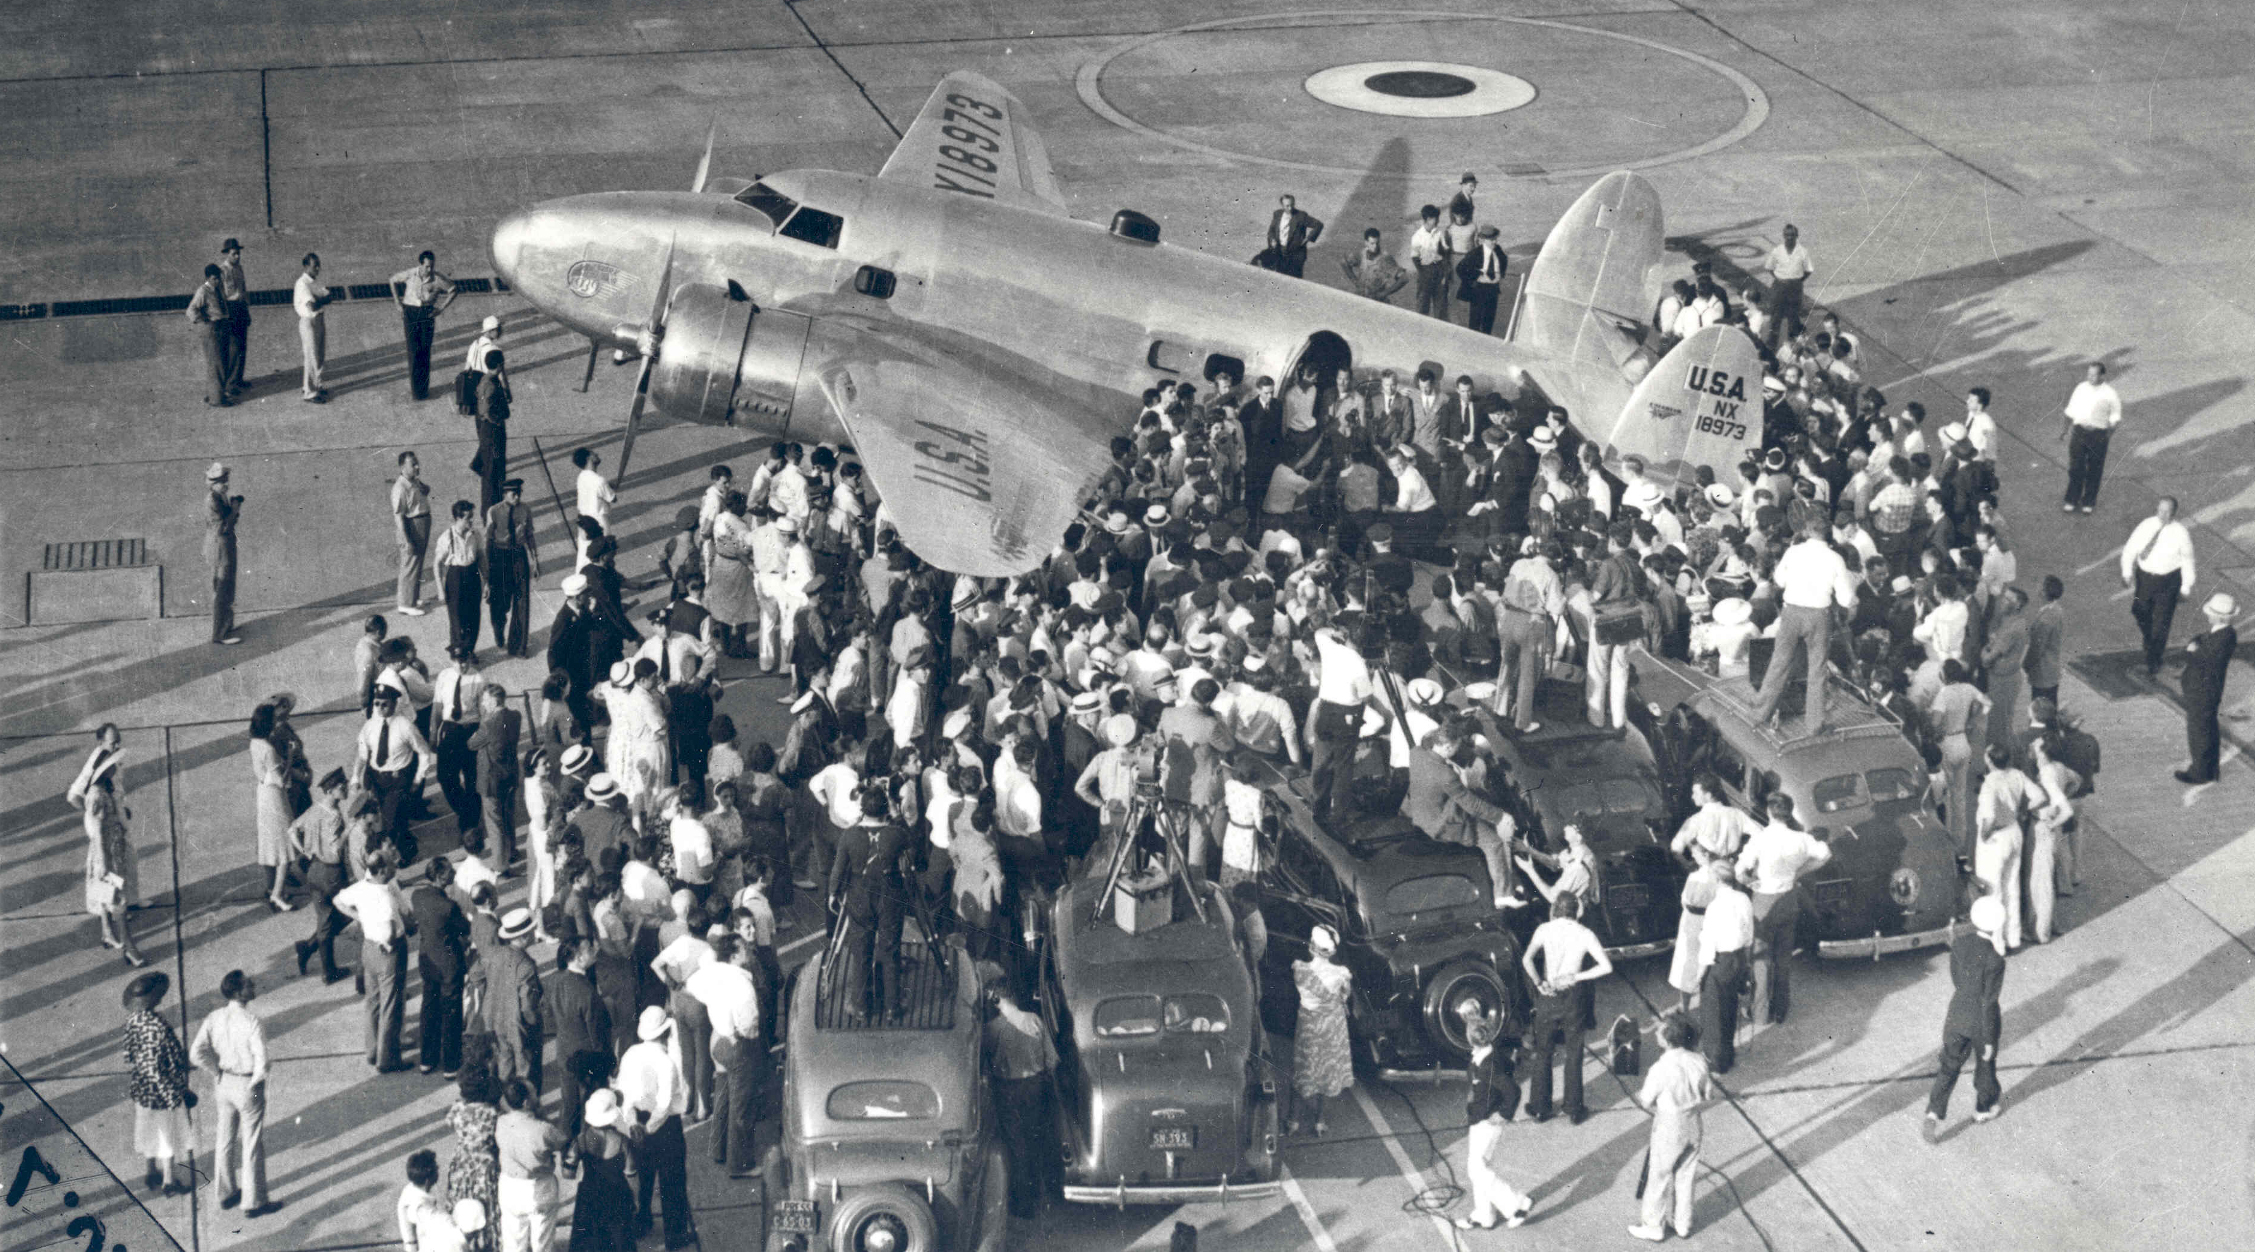 Floyd Bennett Field on Long Island, New York, was a site where one record after another was set and broken in rapid succession during the golden era of aviation between the two world wars. In this photograph, Hughes and his crew prepare to set out for Paris from the Field on the first leg of their tour. Their 91-hour adventure generated publicity for the World's Fair, set to open the following year -- and made Howard Hughes an international celebrity.